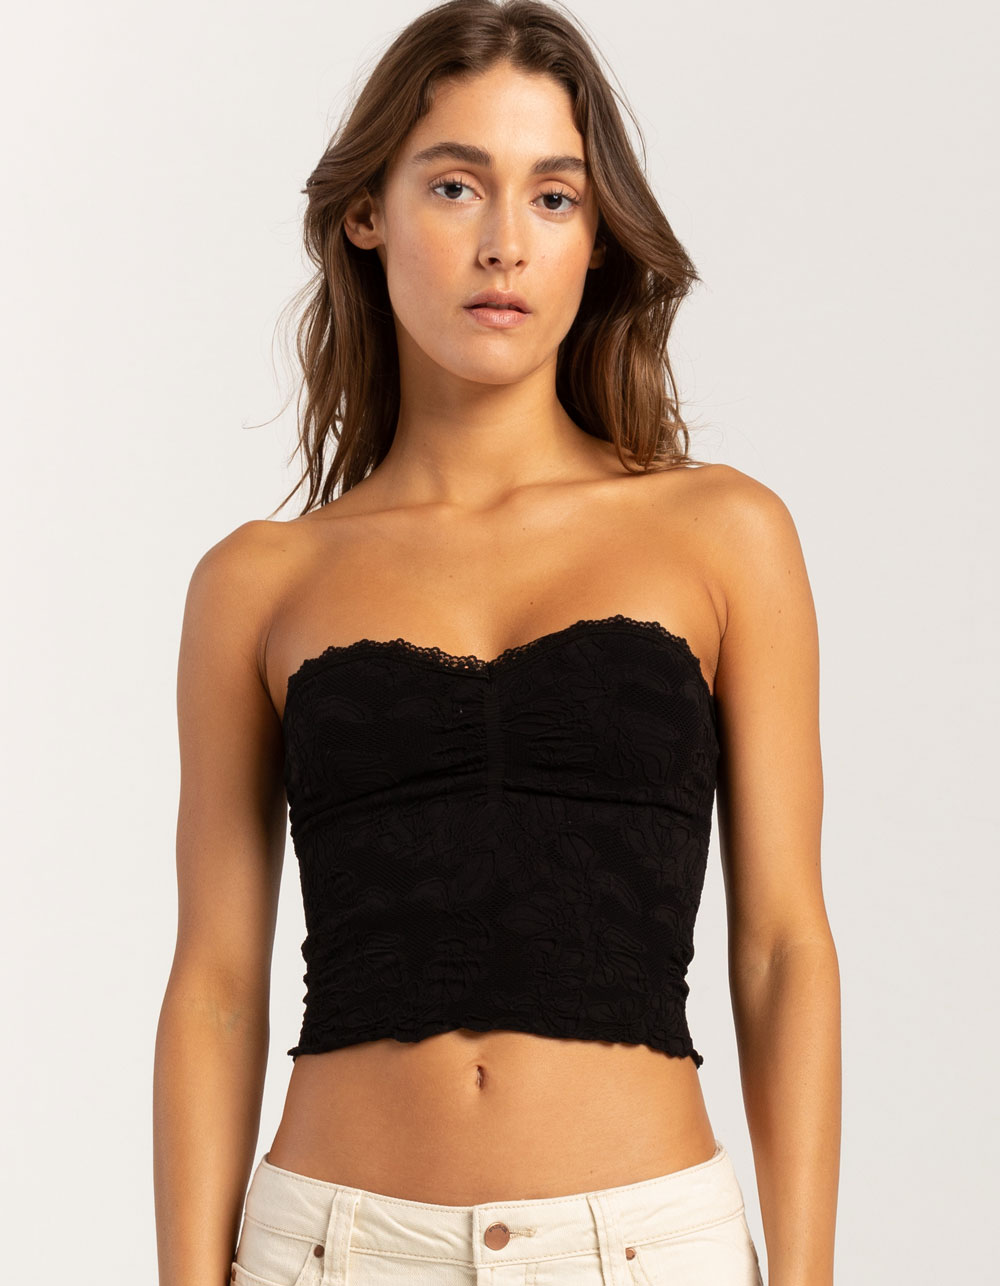 Free People Women's Seamless & Lace Bandeau Tube Top XS/S $20